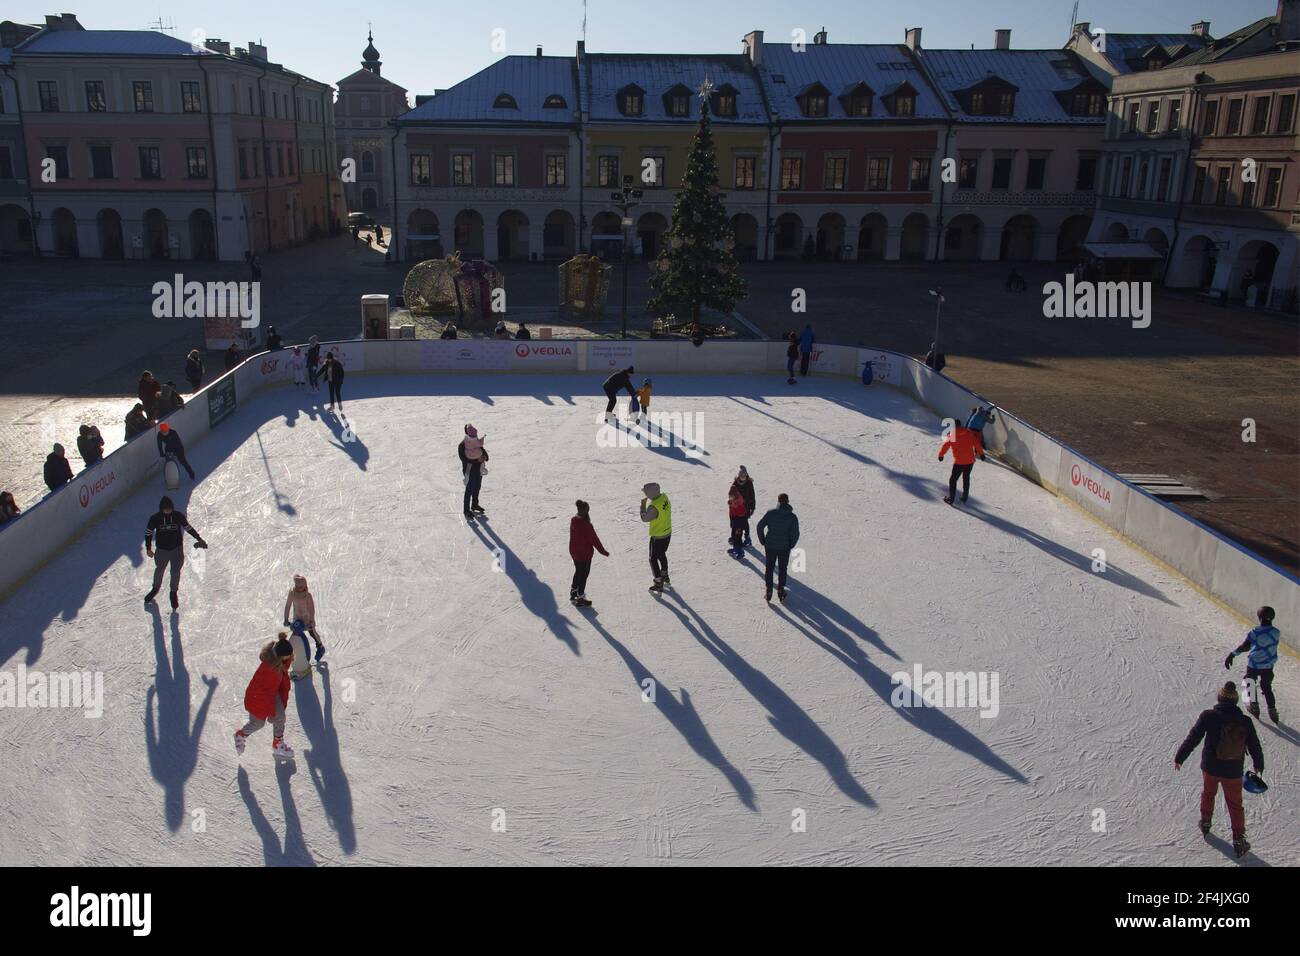 Zamosc, Poland, December 27, 2020. Townspeople skate on an ice skating rink on a sunny winter morning. Skating rink in the central square of the city. Stock Photo